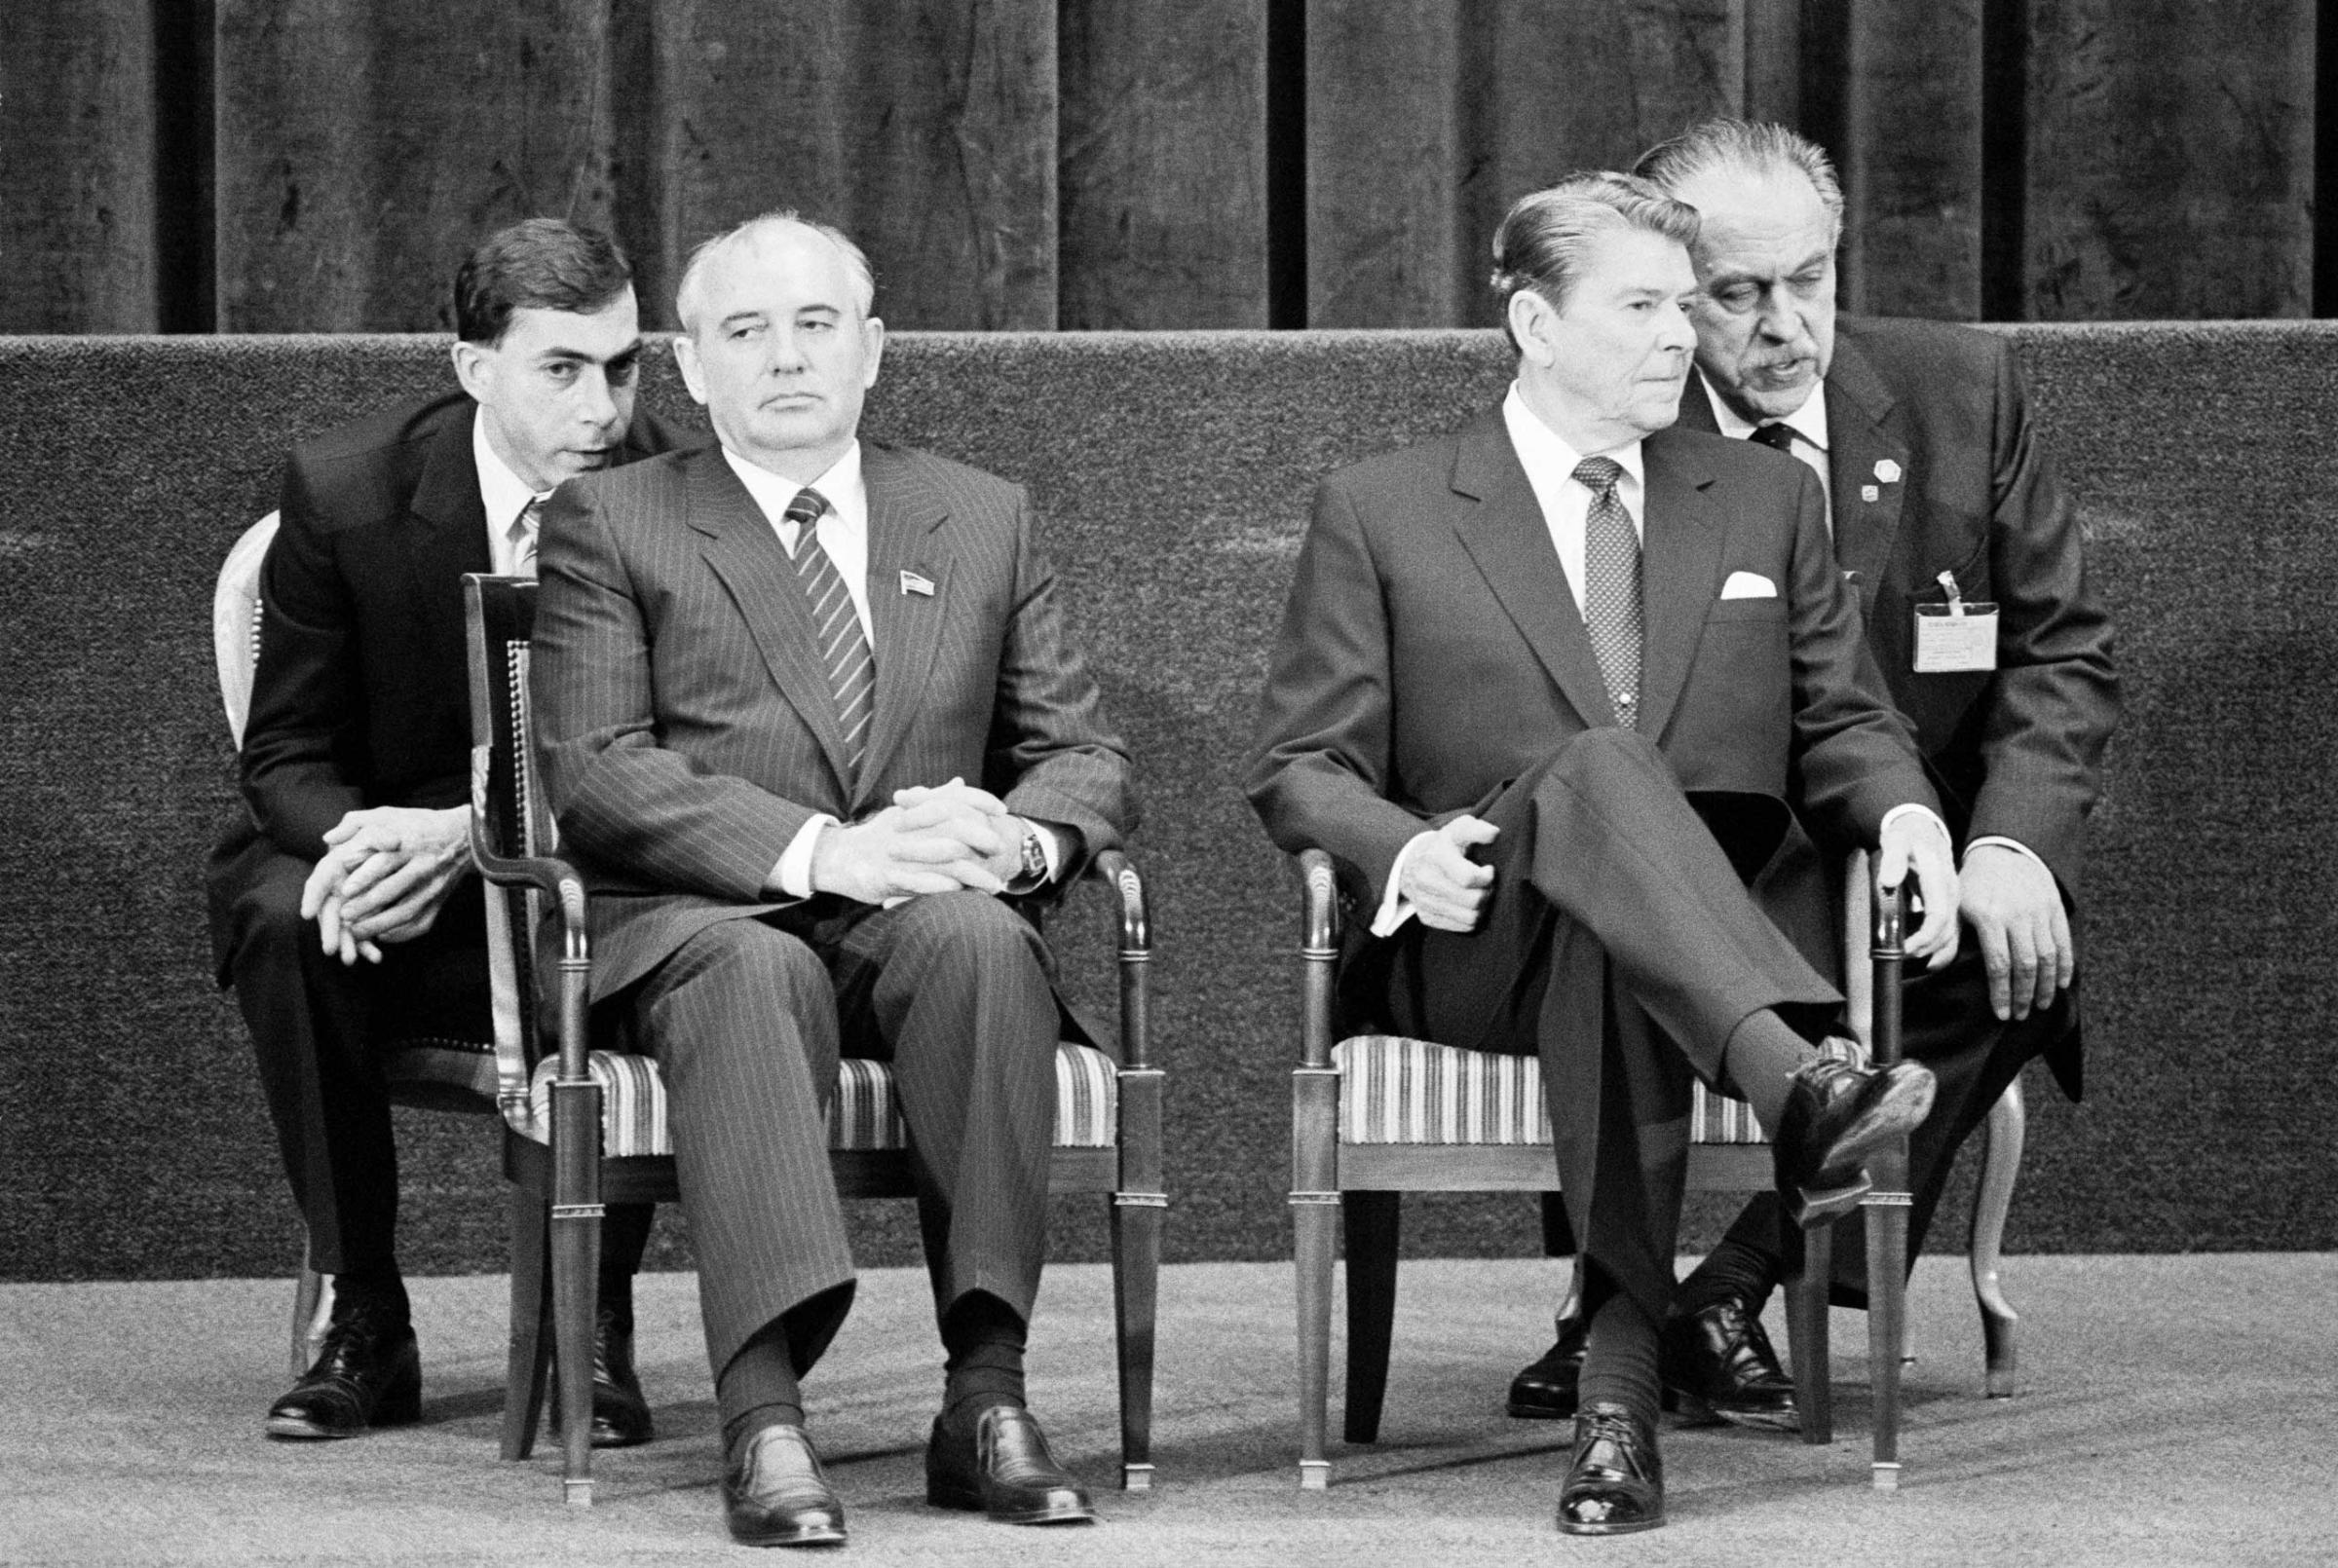 The summit between Ronald Reagan, the American President and Mikhail Gorbachev, the General Secretary of the Communist Party of the USSR. The two leaders listen to their interpreters during a press conference. Geneva, Switzerland. 1985